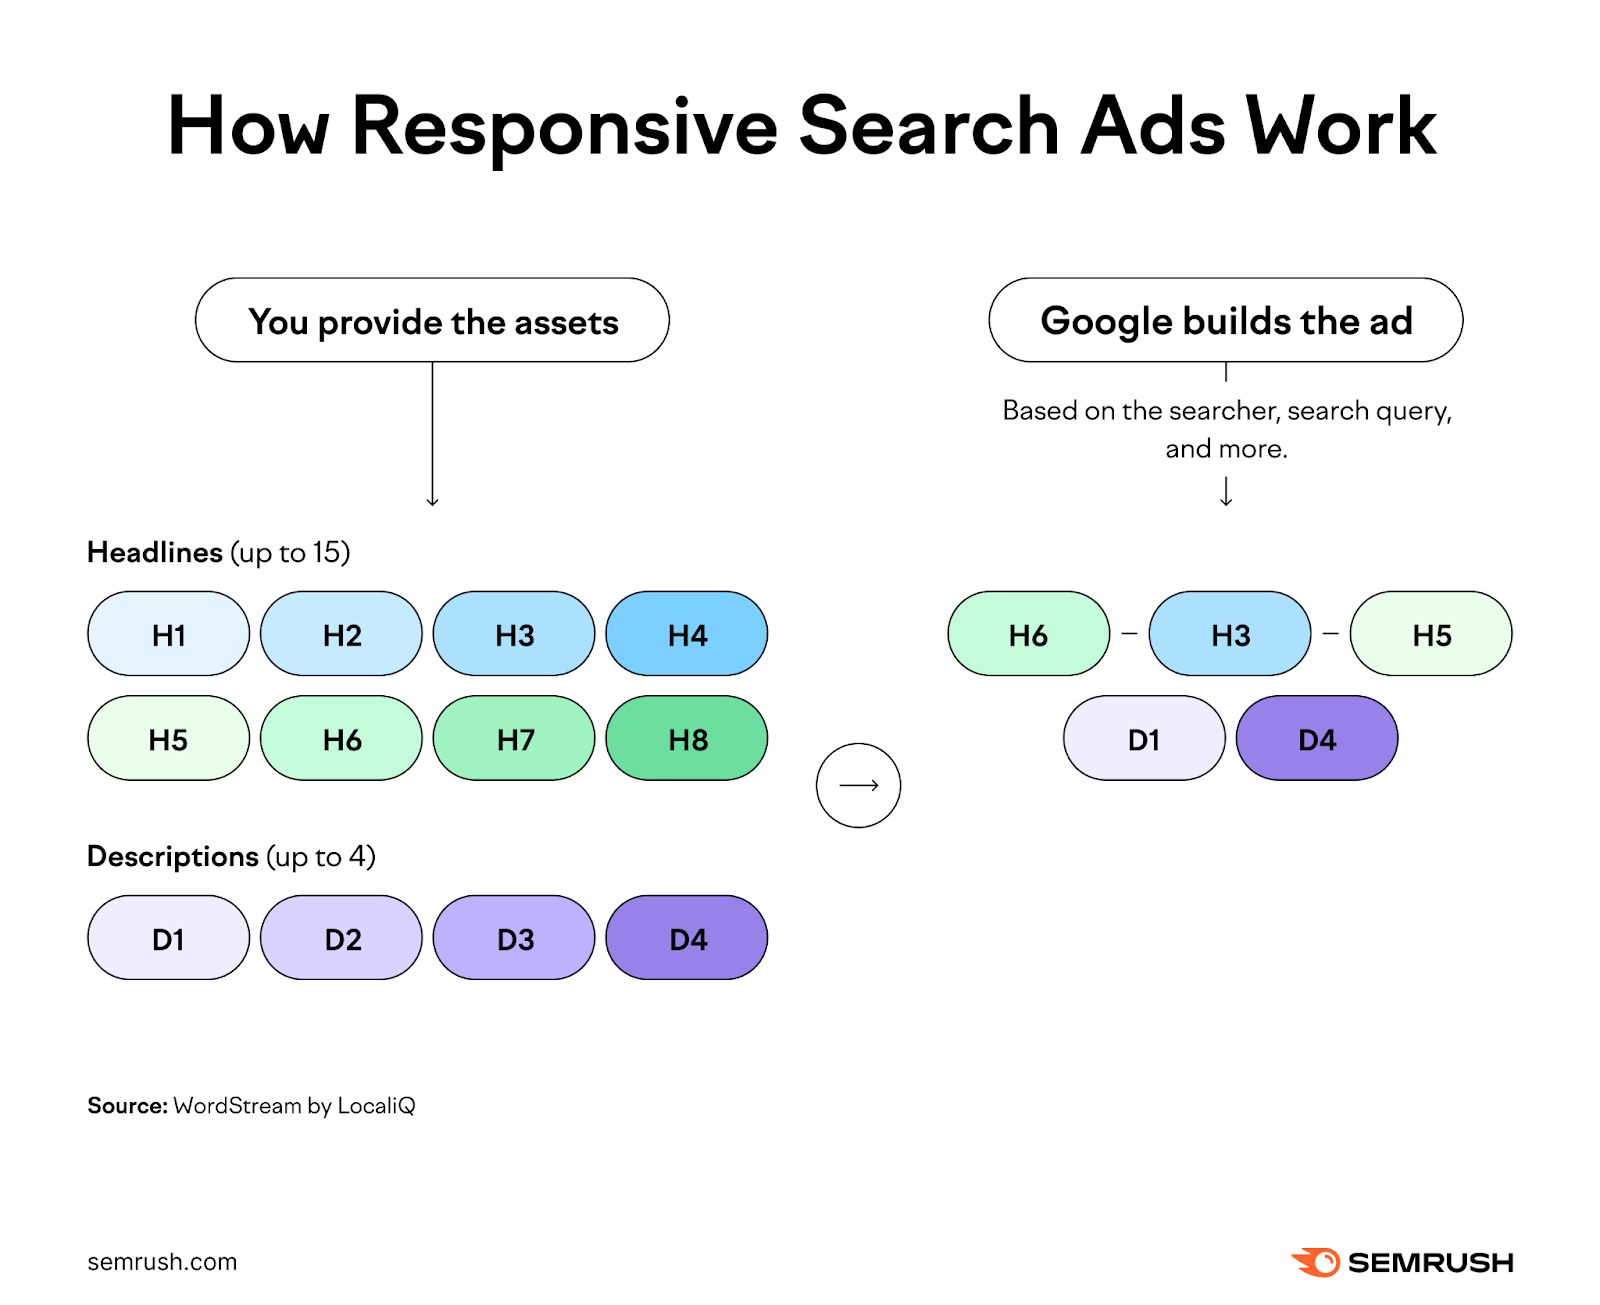 How responsive search ads work